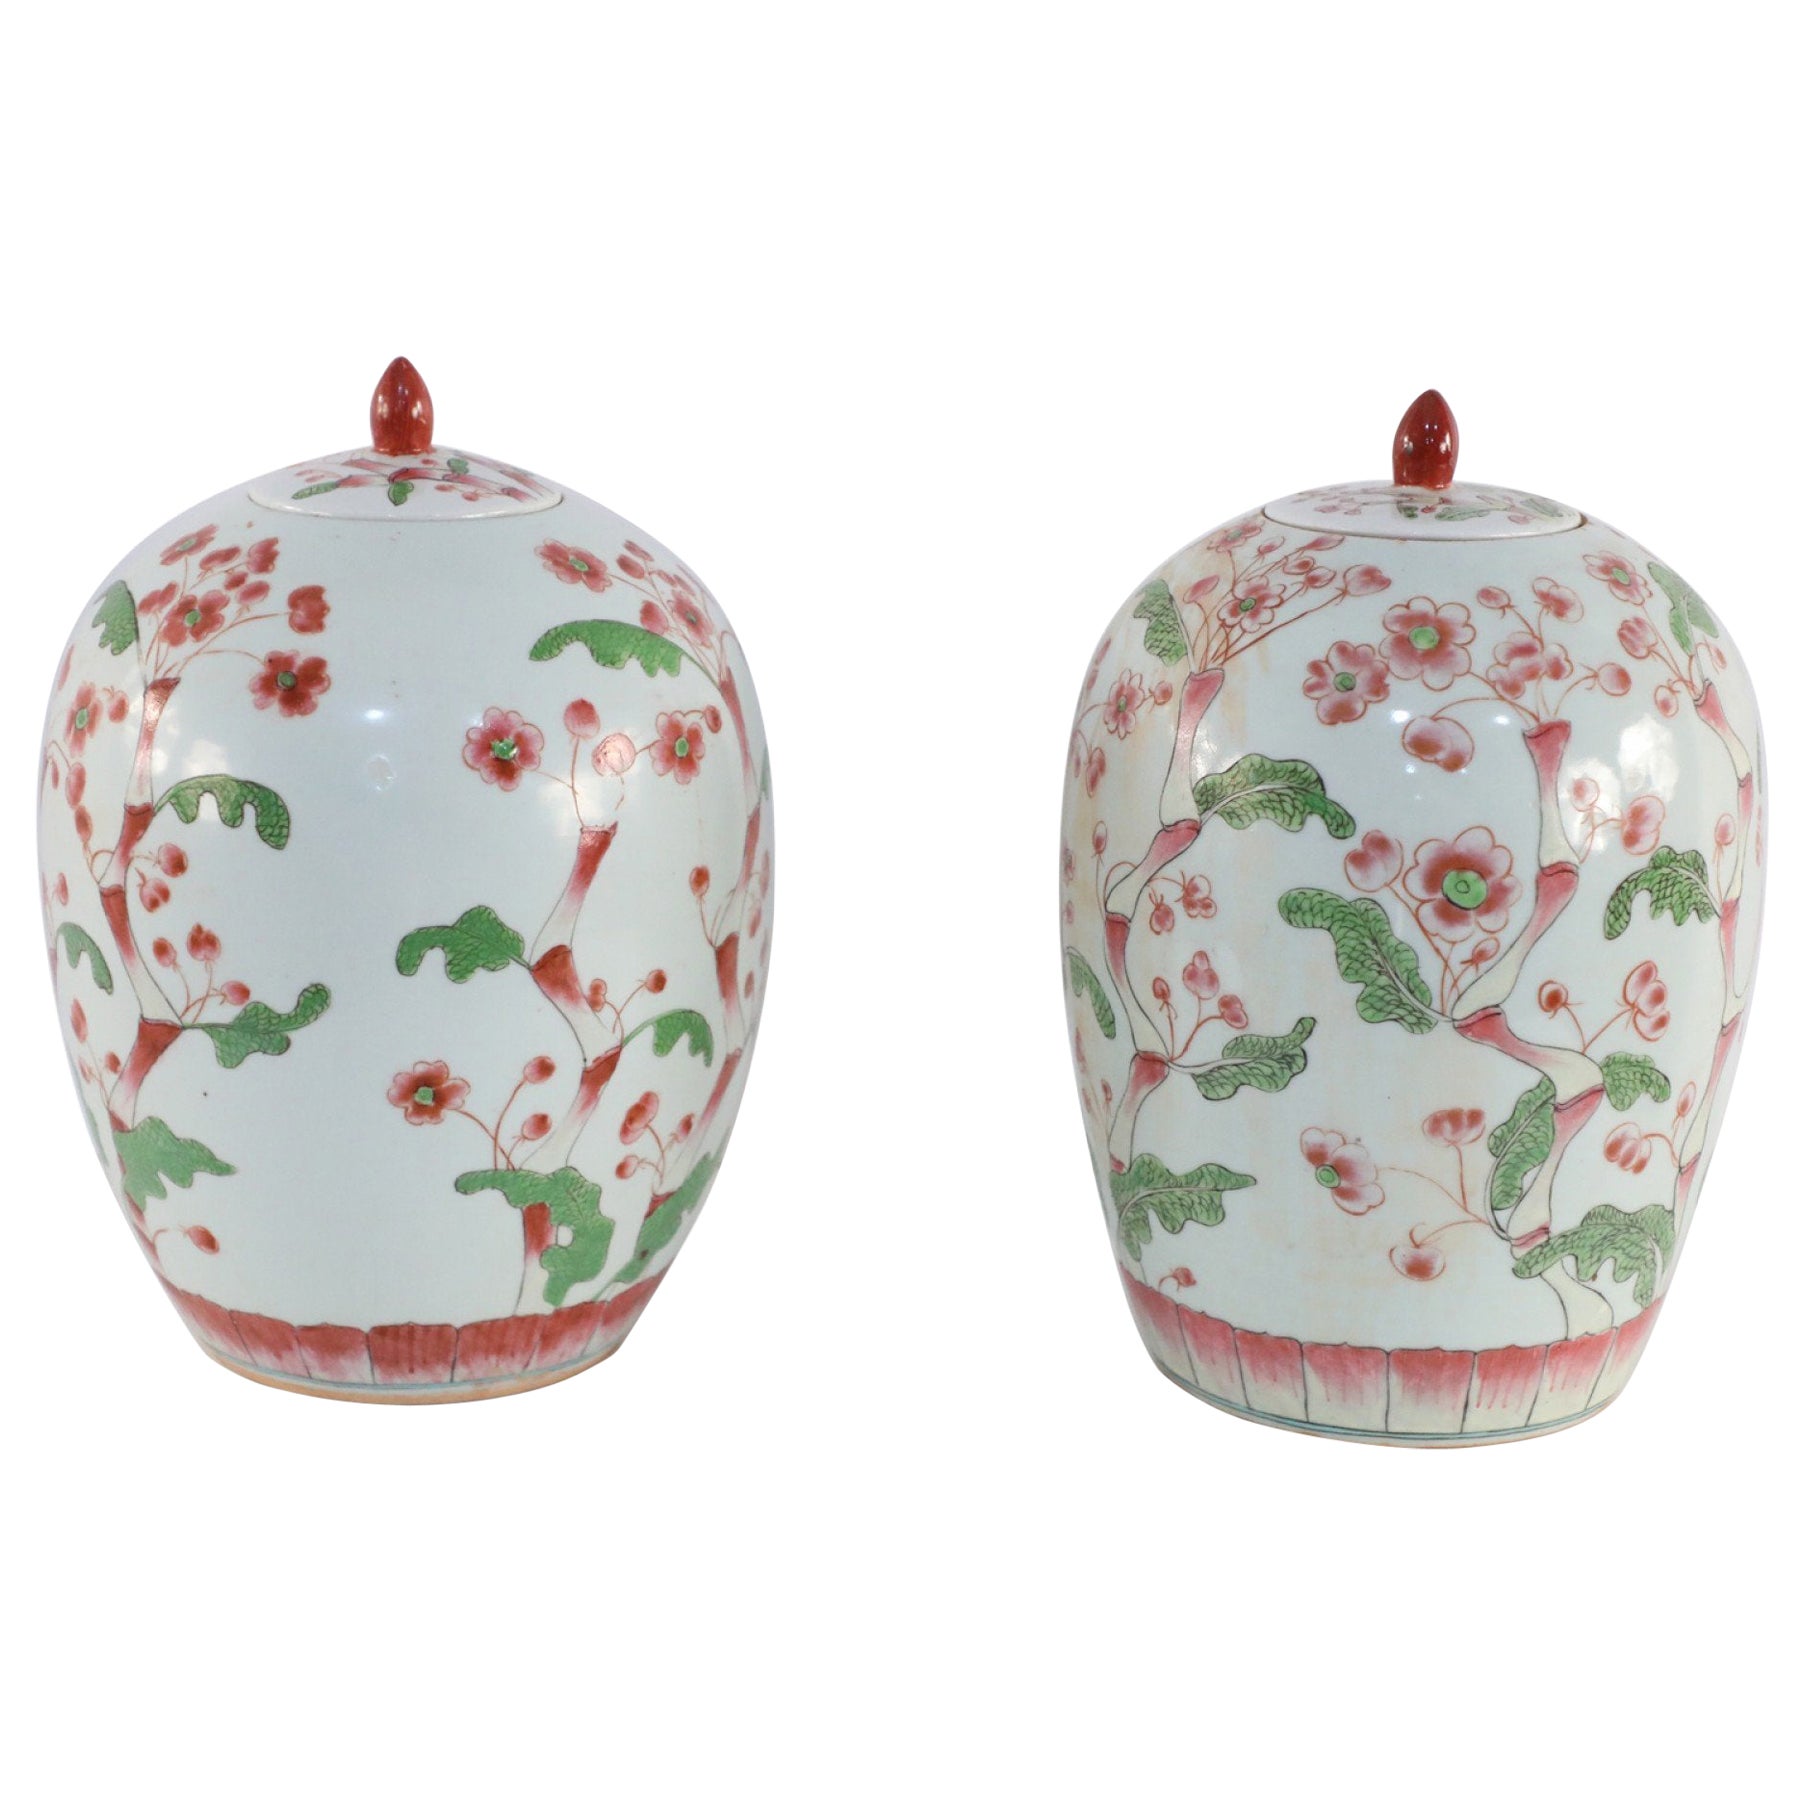 Pair of Chinese White and Pink Cherry Blossom Motif Lidded Porcelain Urns For Sale